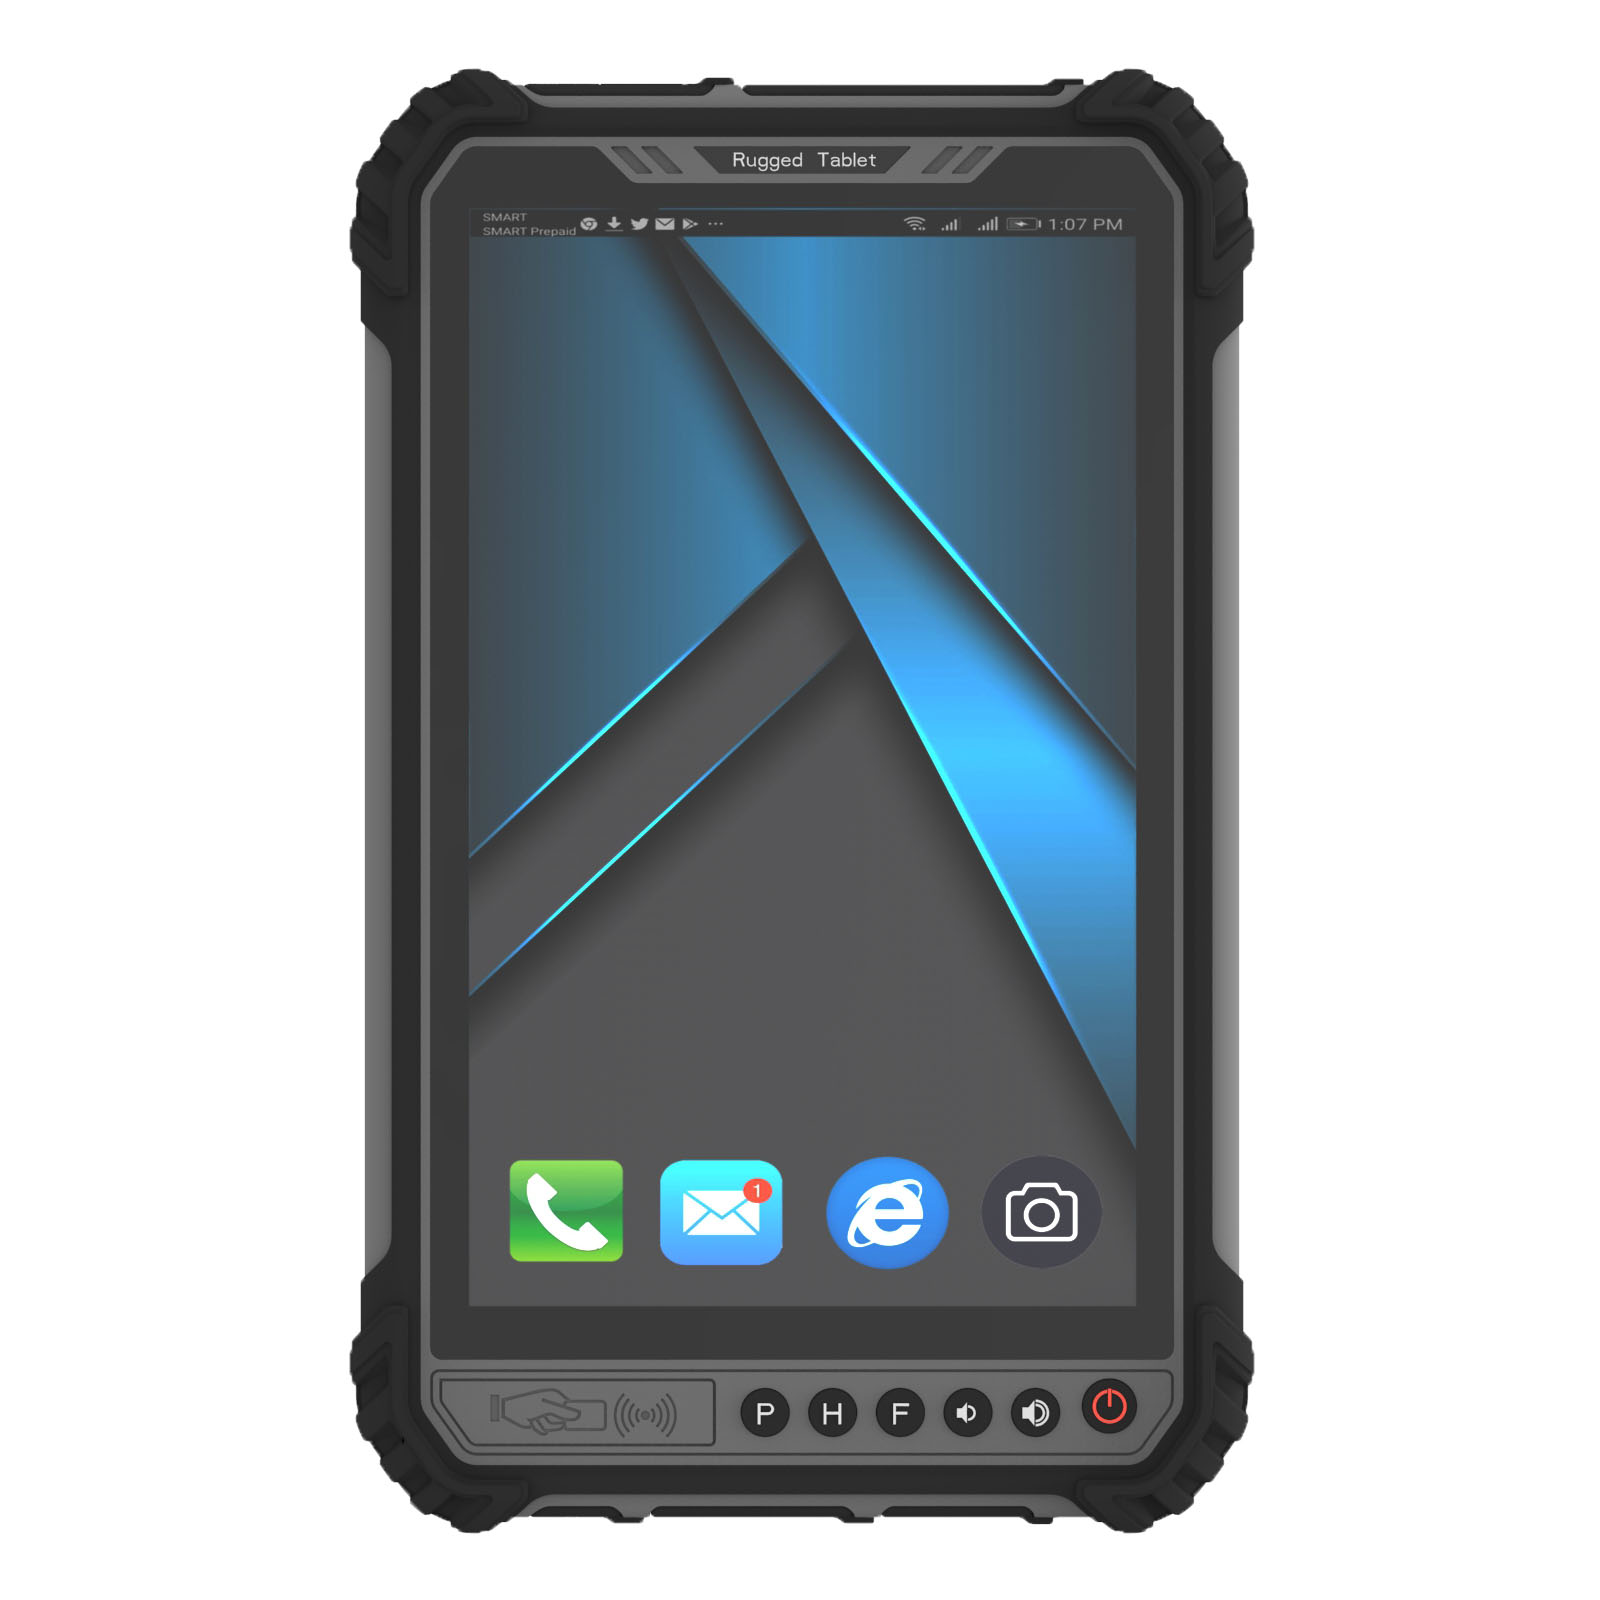 ST9-A5 new arrive great rugged tablet